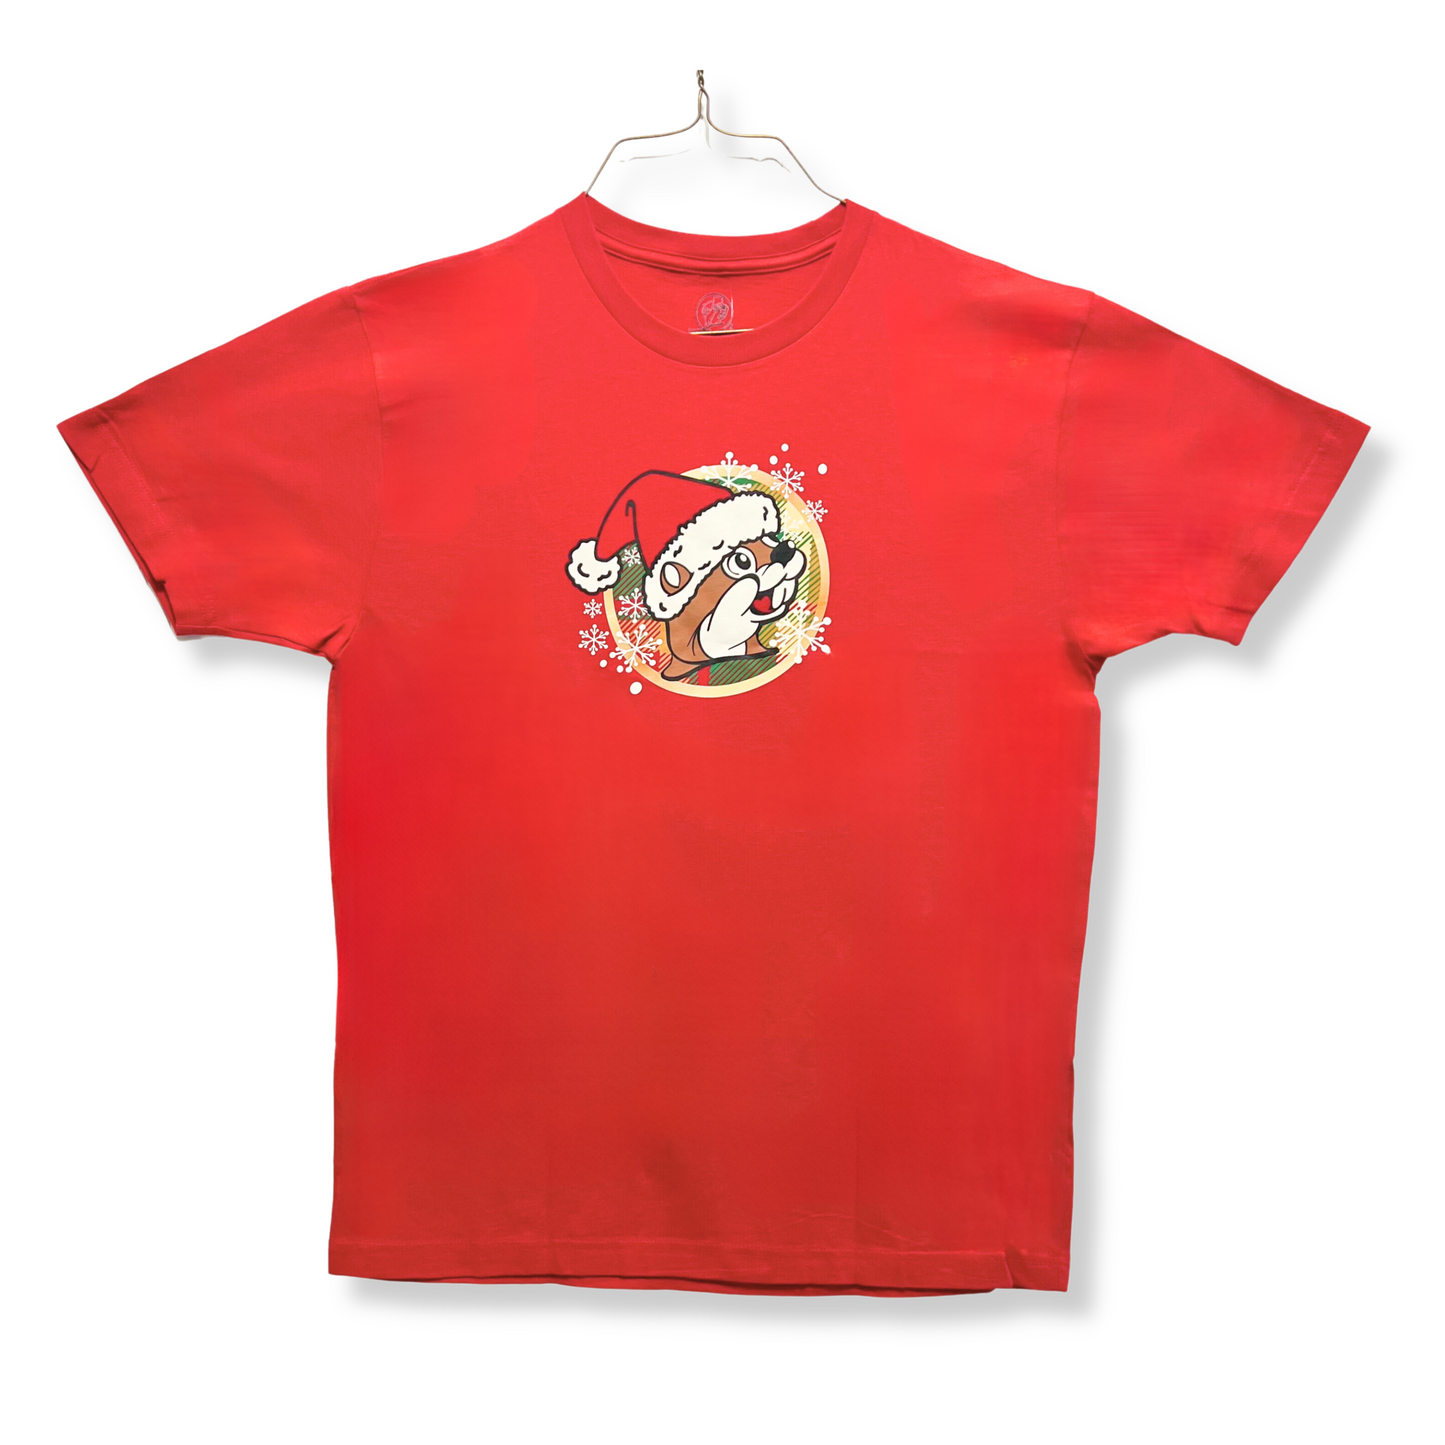 Buc-ee's It's Beginning To Look A Lot Like Christmas 2023 Shirt buc ees buc ee's bucees buccees buc-ees